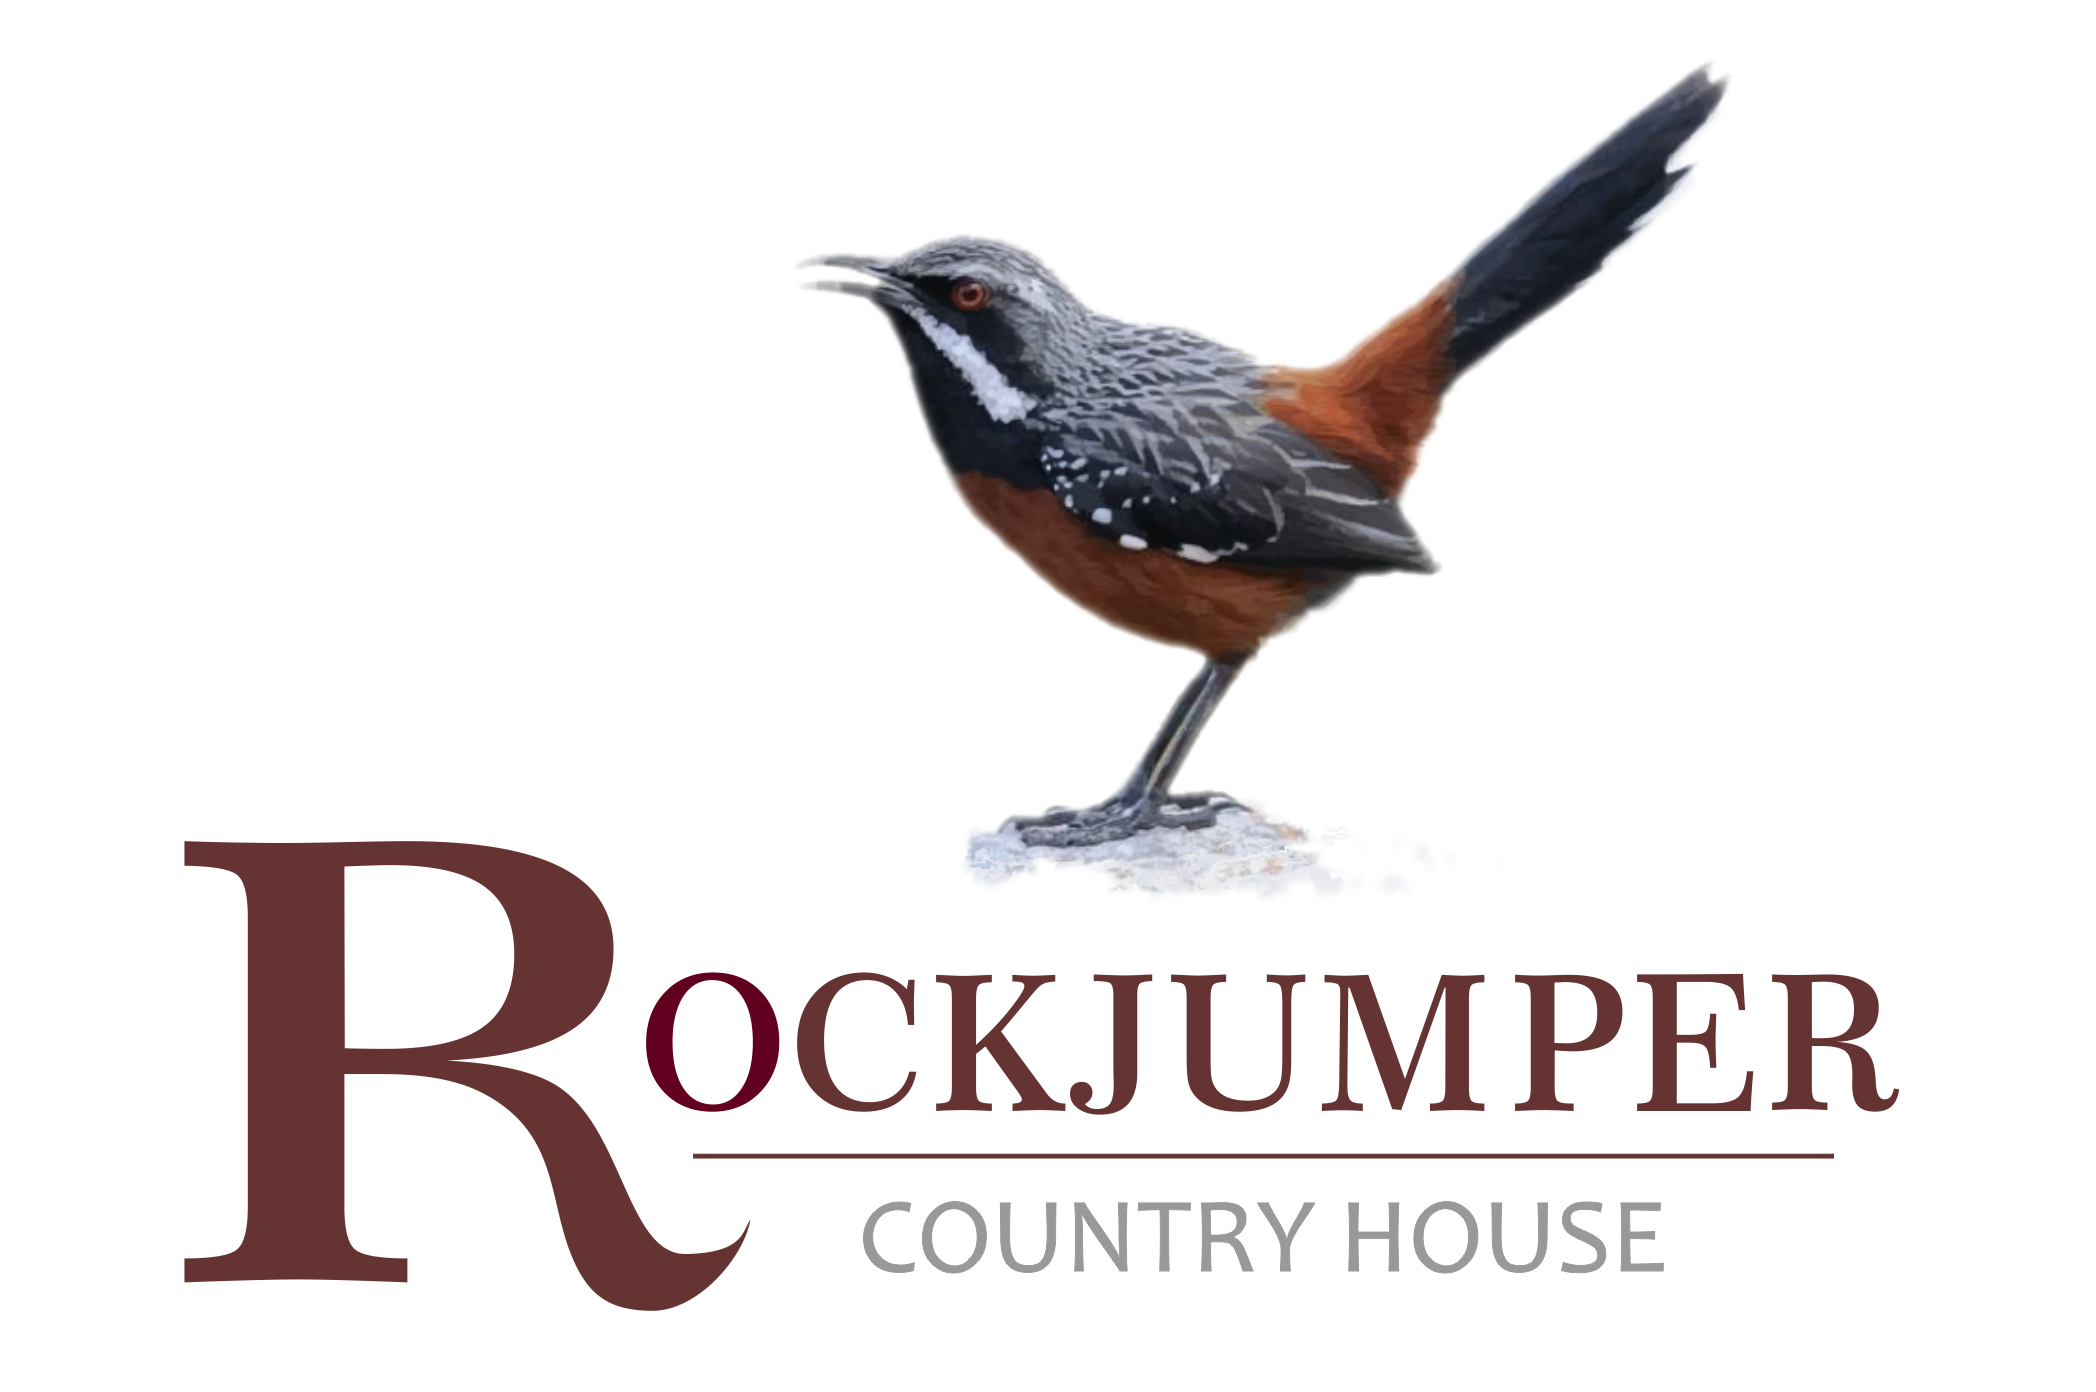 Rockjumper Country House